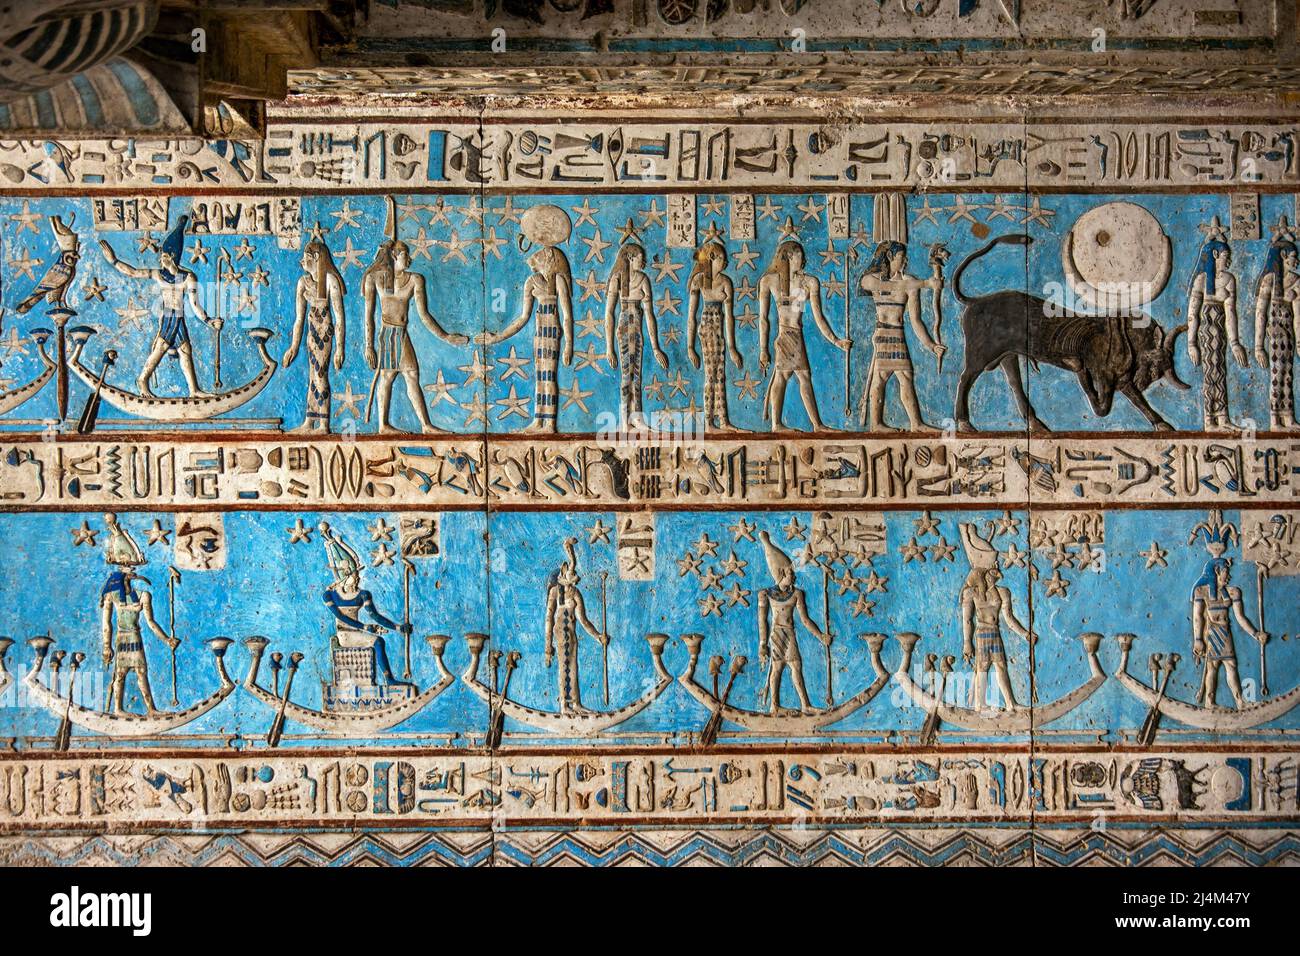 Hieroglyphic carvings in ancient egyptian temple Stock Photo